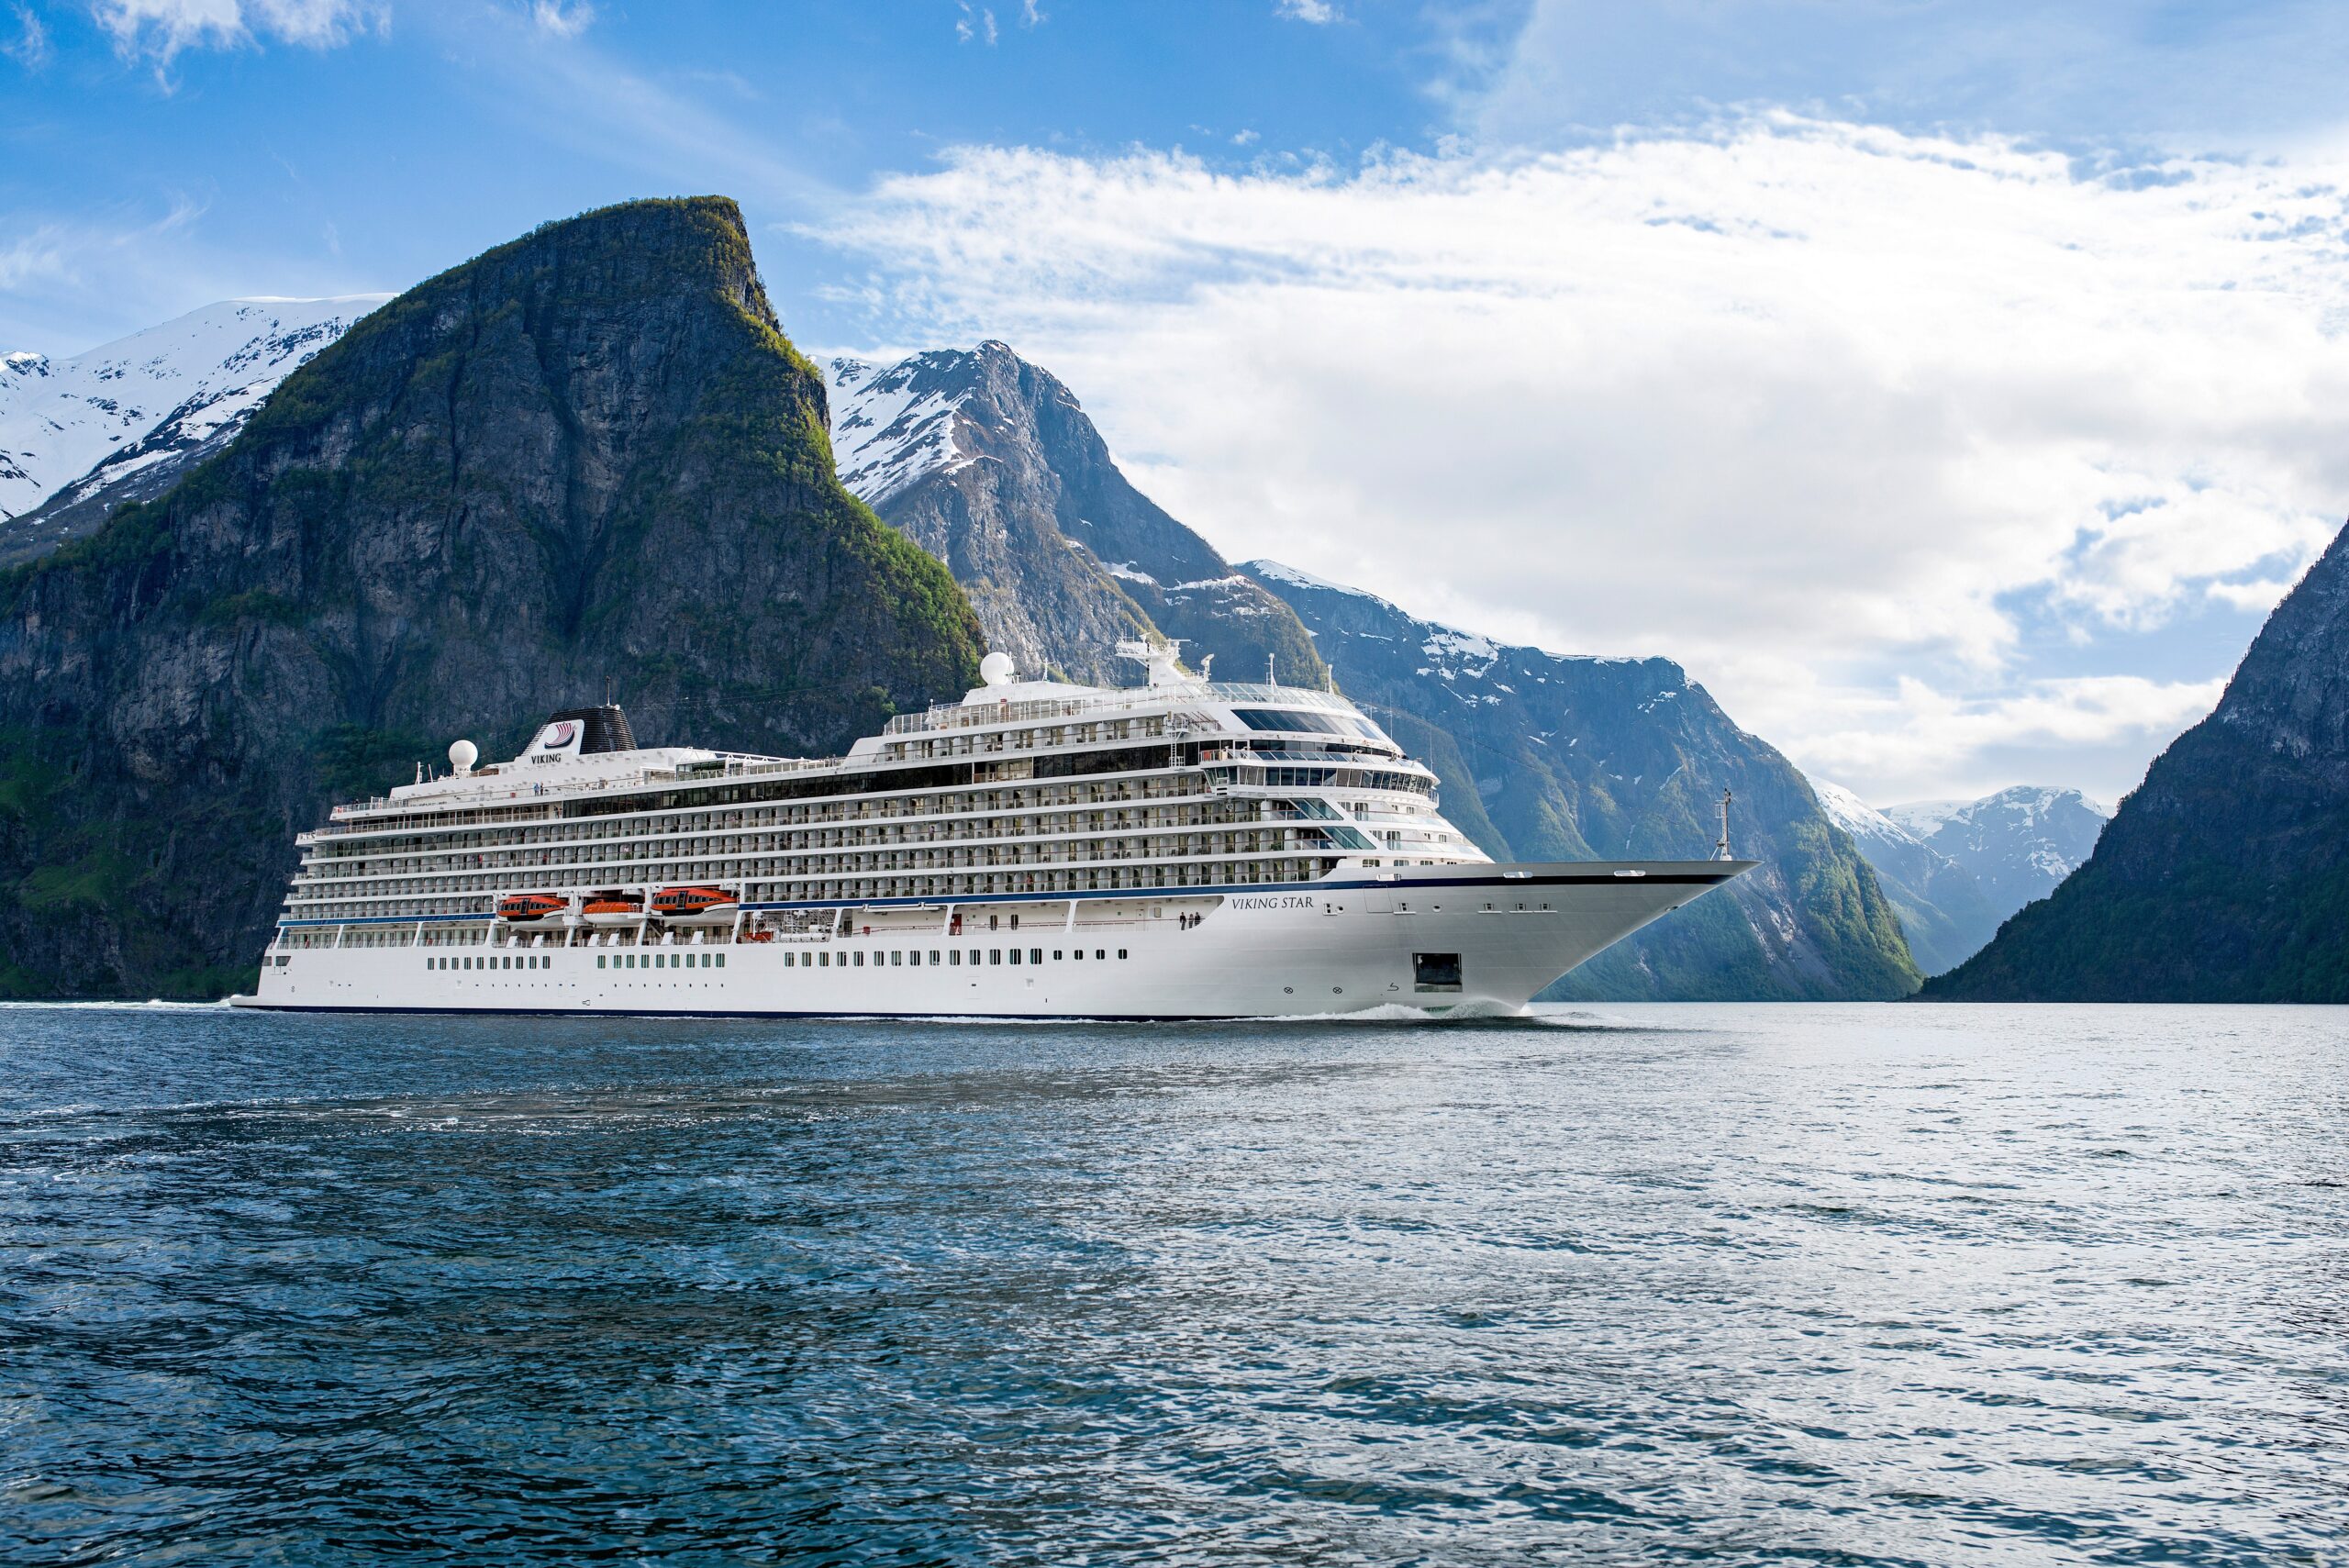 Viking Star cruises through the fjords near Flam, Norway